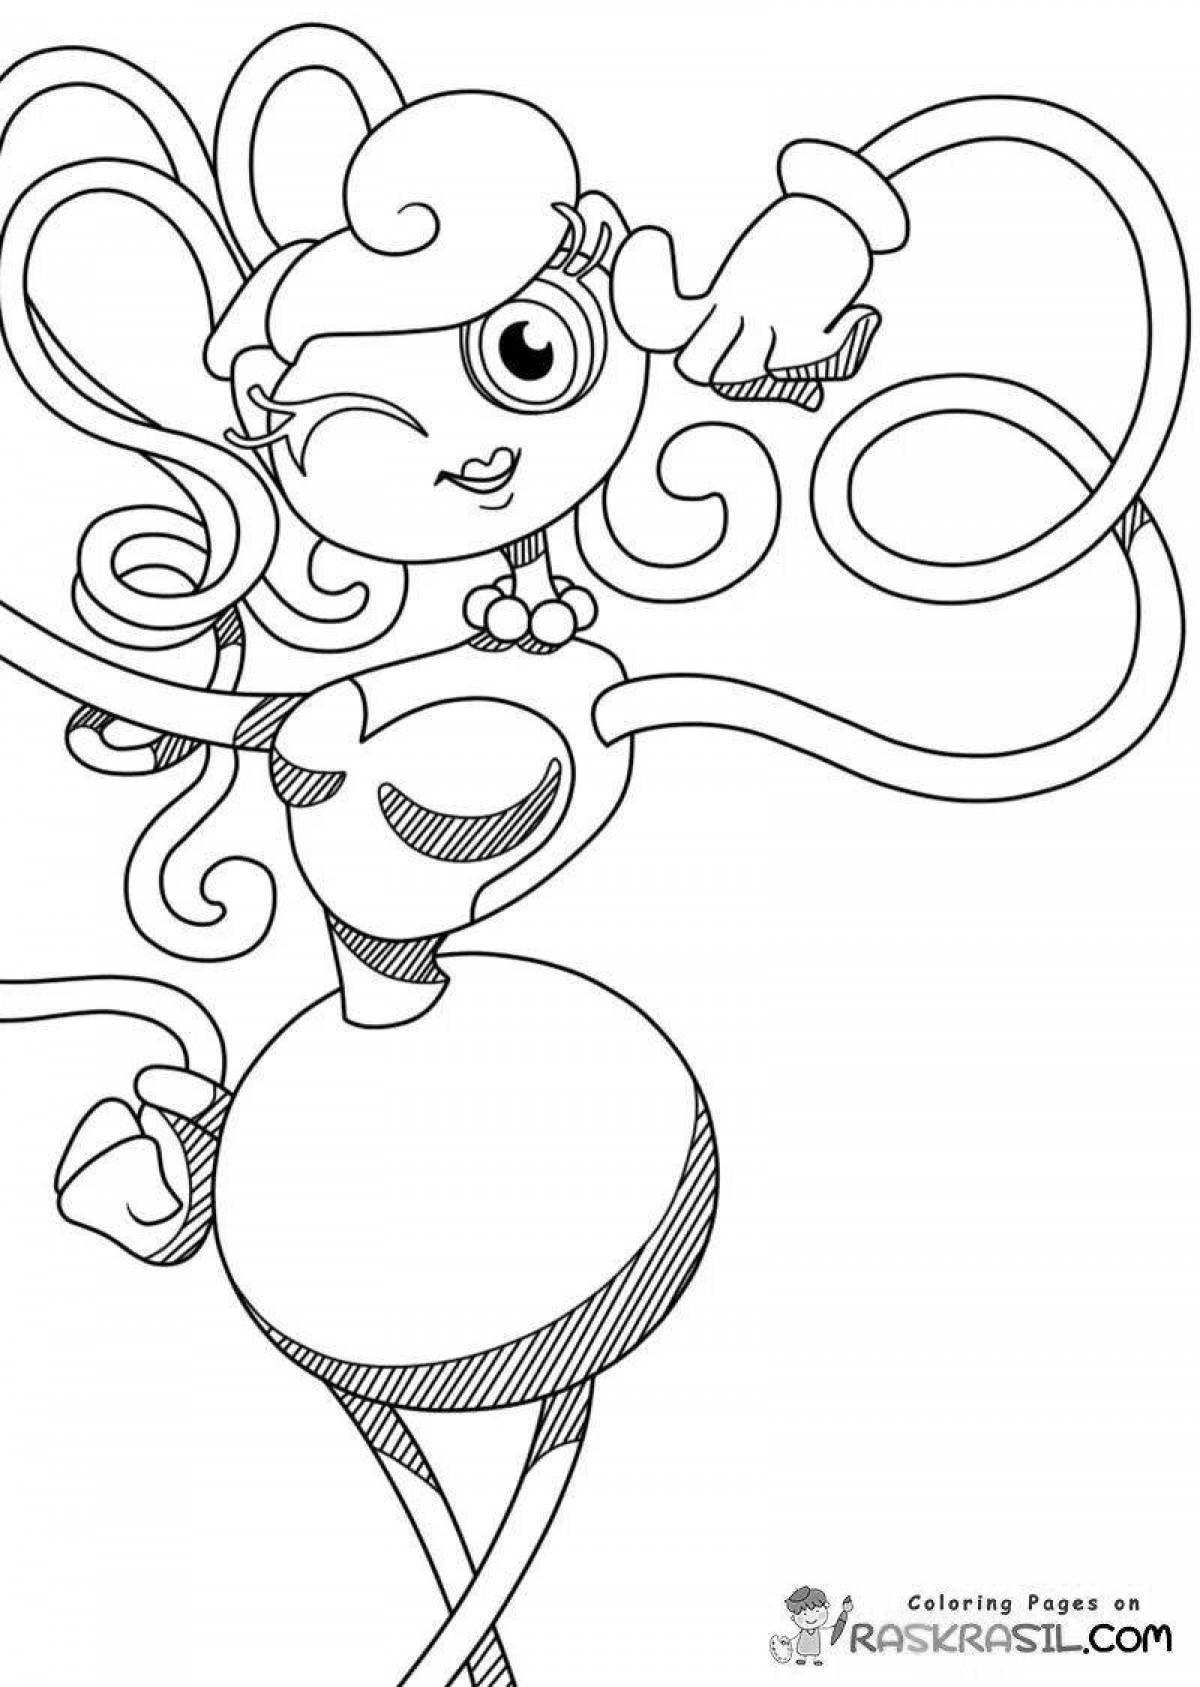 Glowing poppy coloring page